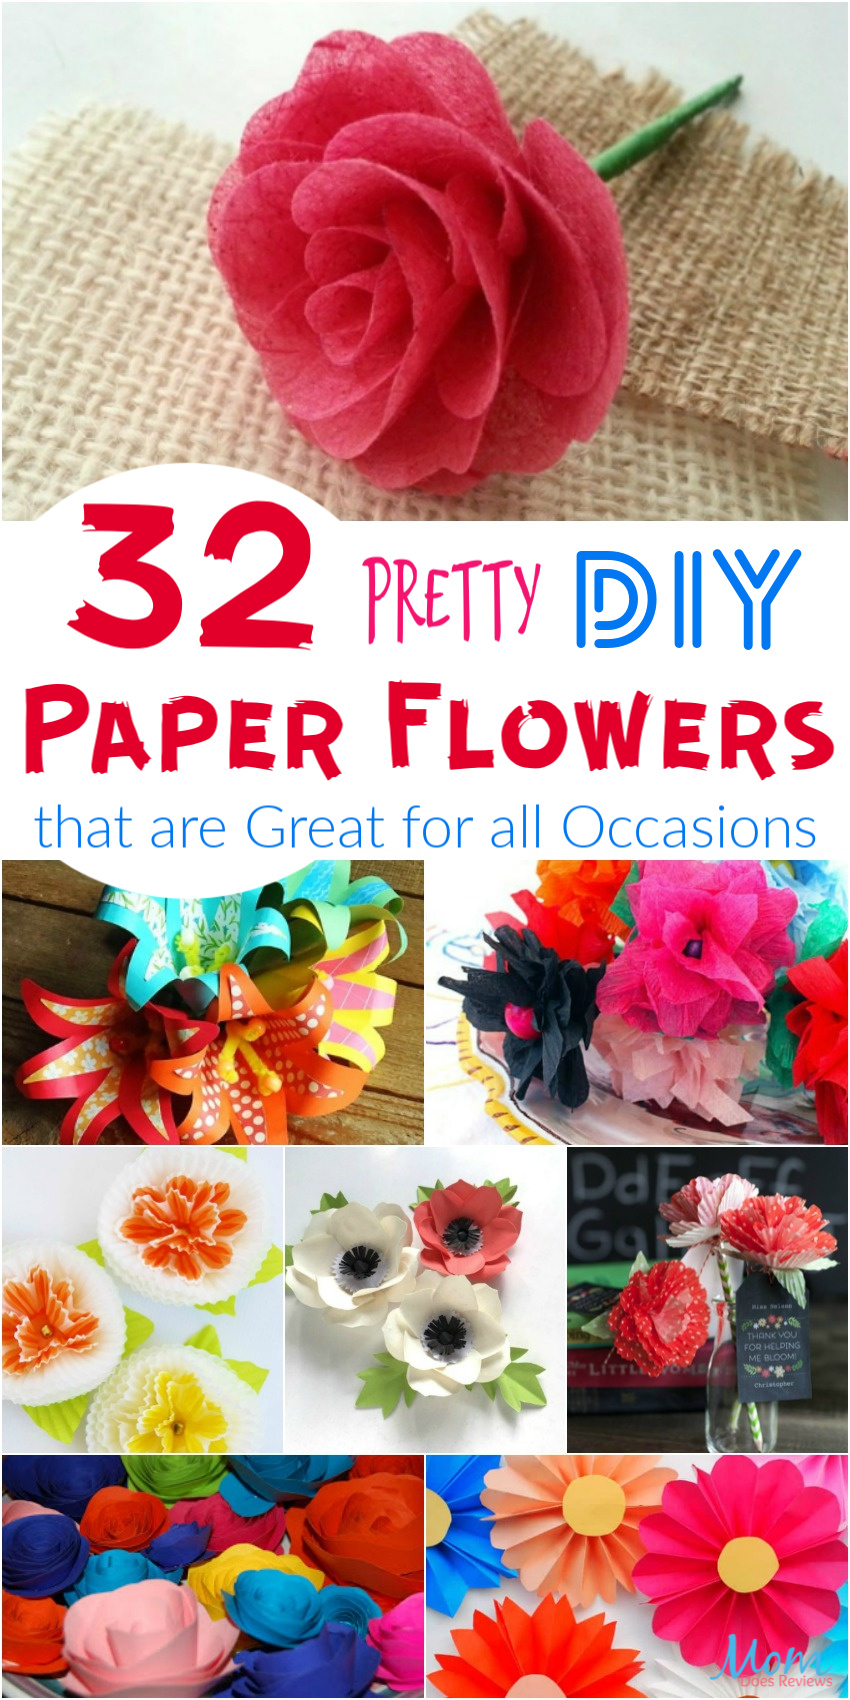 32 Pretty DIY Paper Flowers that are Great for all Occasions